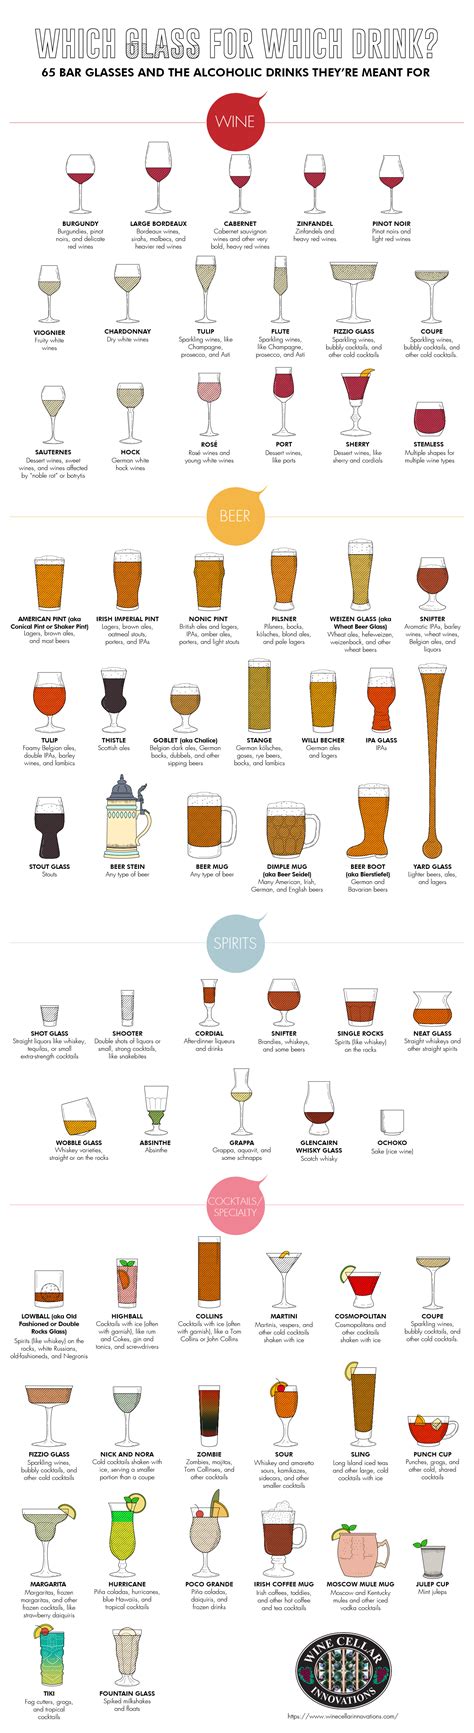 65 Bar Glasses And What They Re Meant For — Cool Infographics